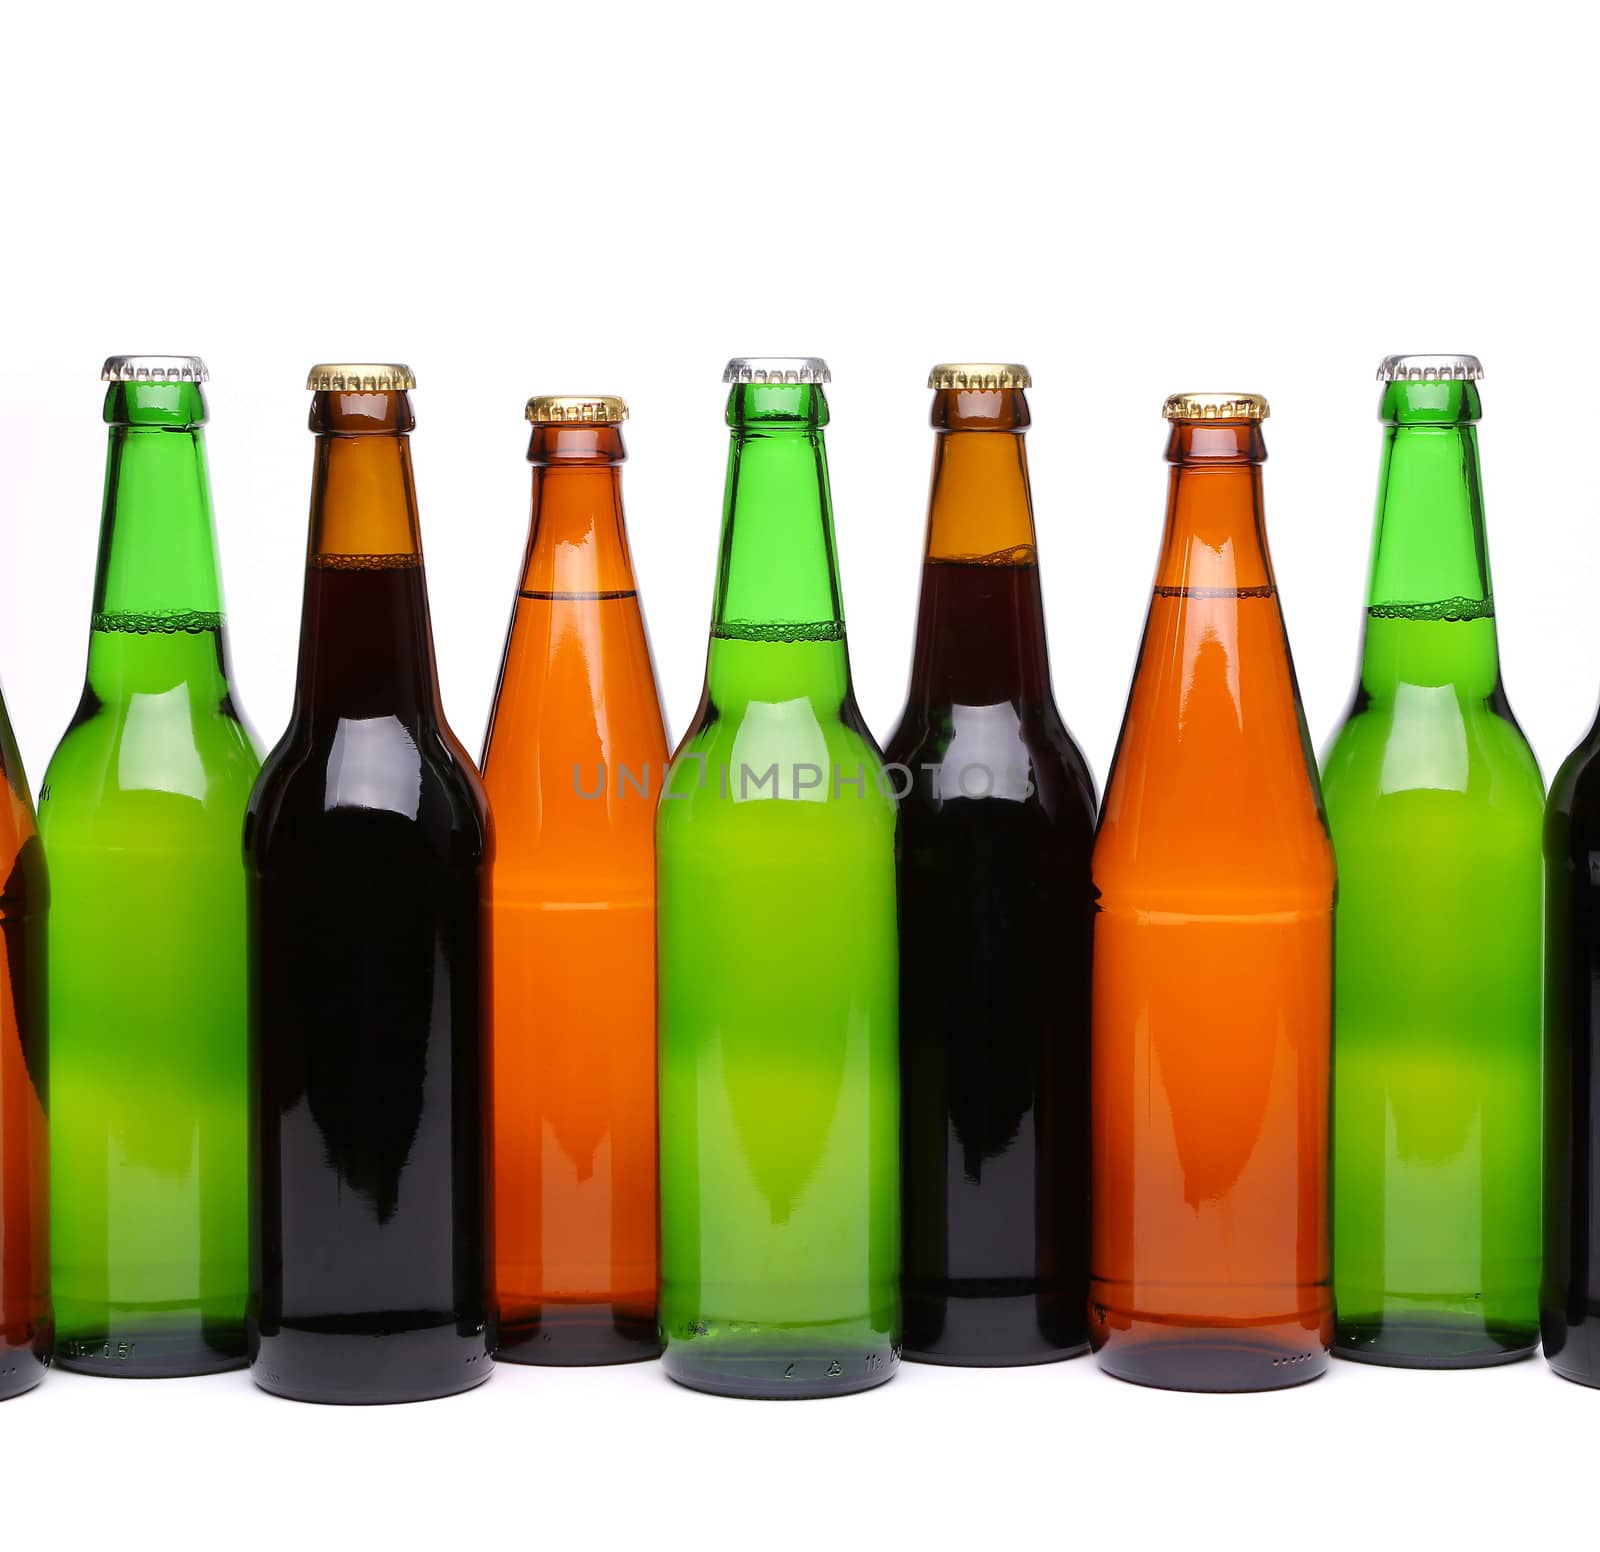 bottles of beer in row by indigolotos